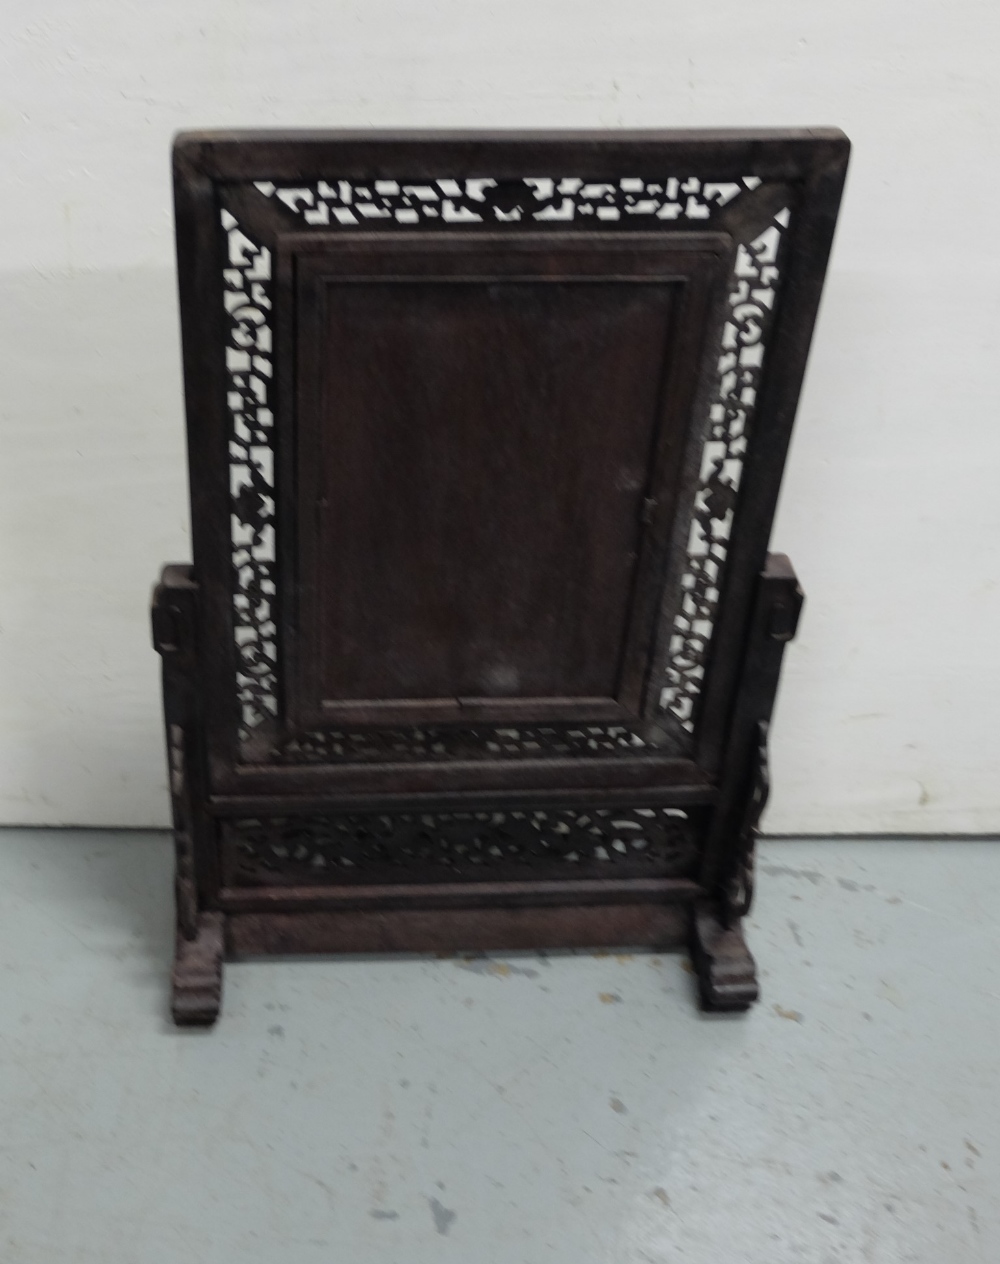 Fretwork Hardwood Fire Screen with a Porcelain Insert - Image 2 of 2